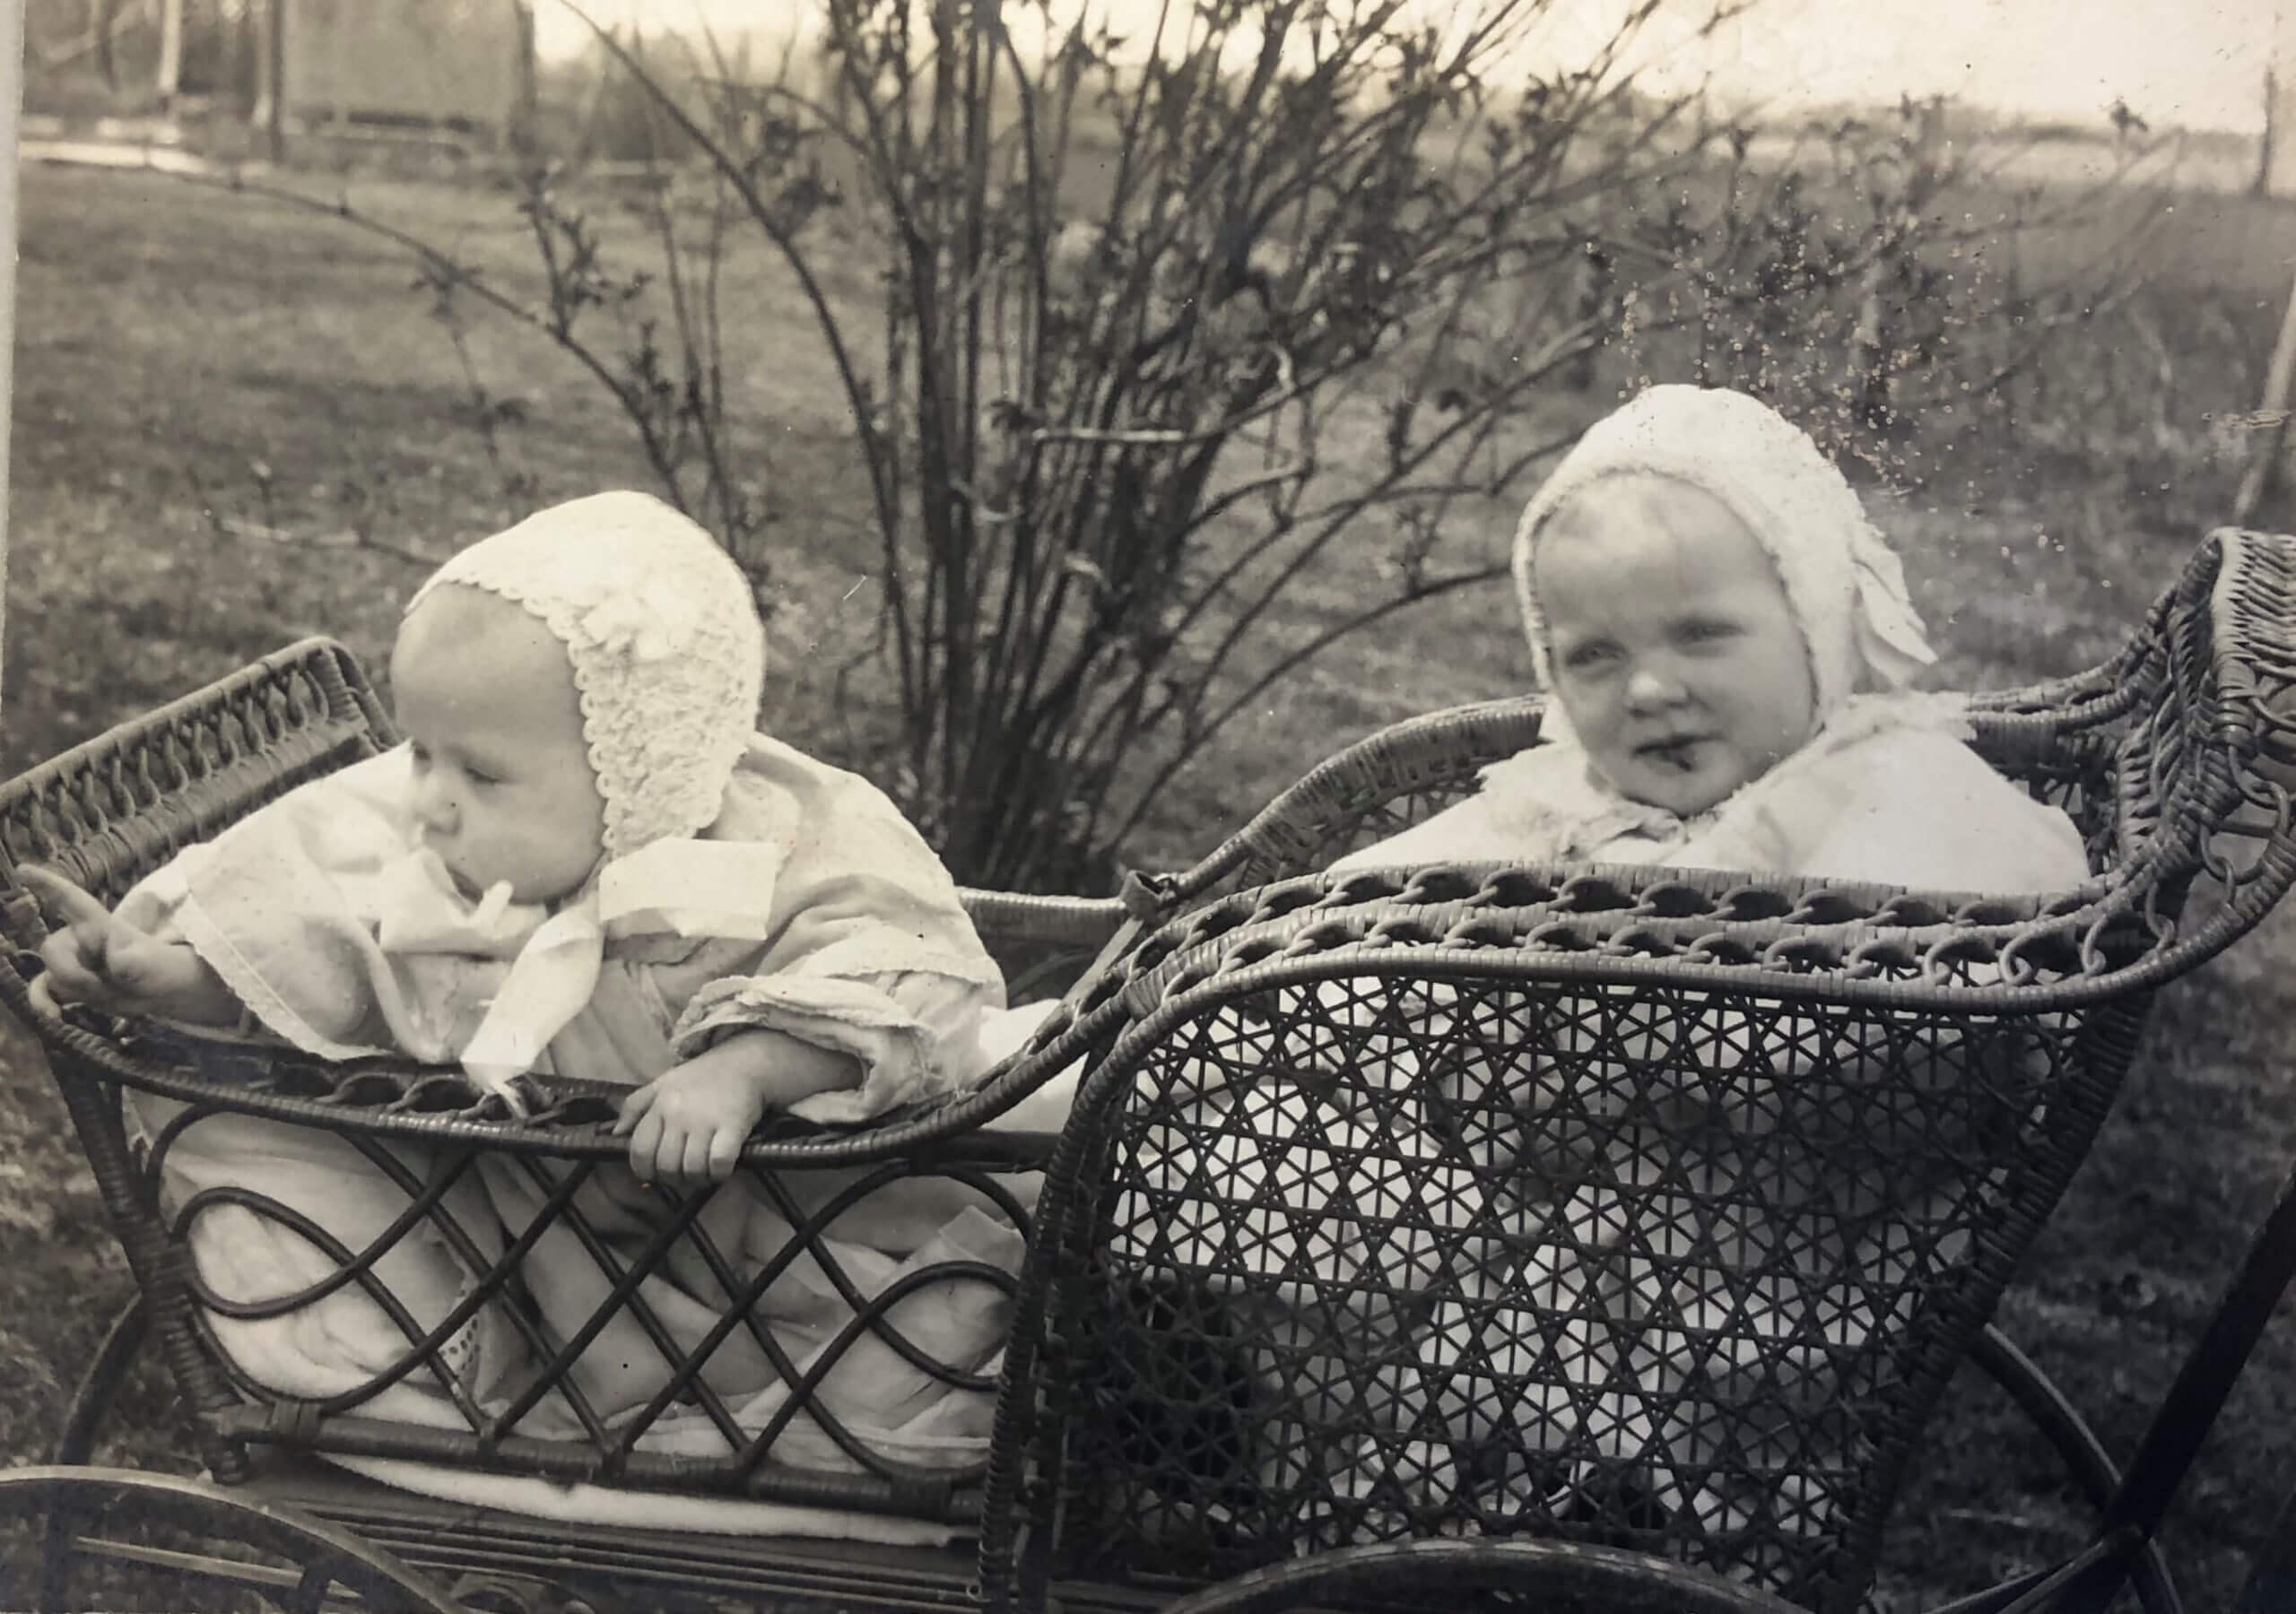 Historical photos of infants at Christ’s Home for Children Eastern PA